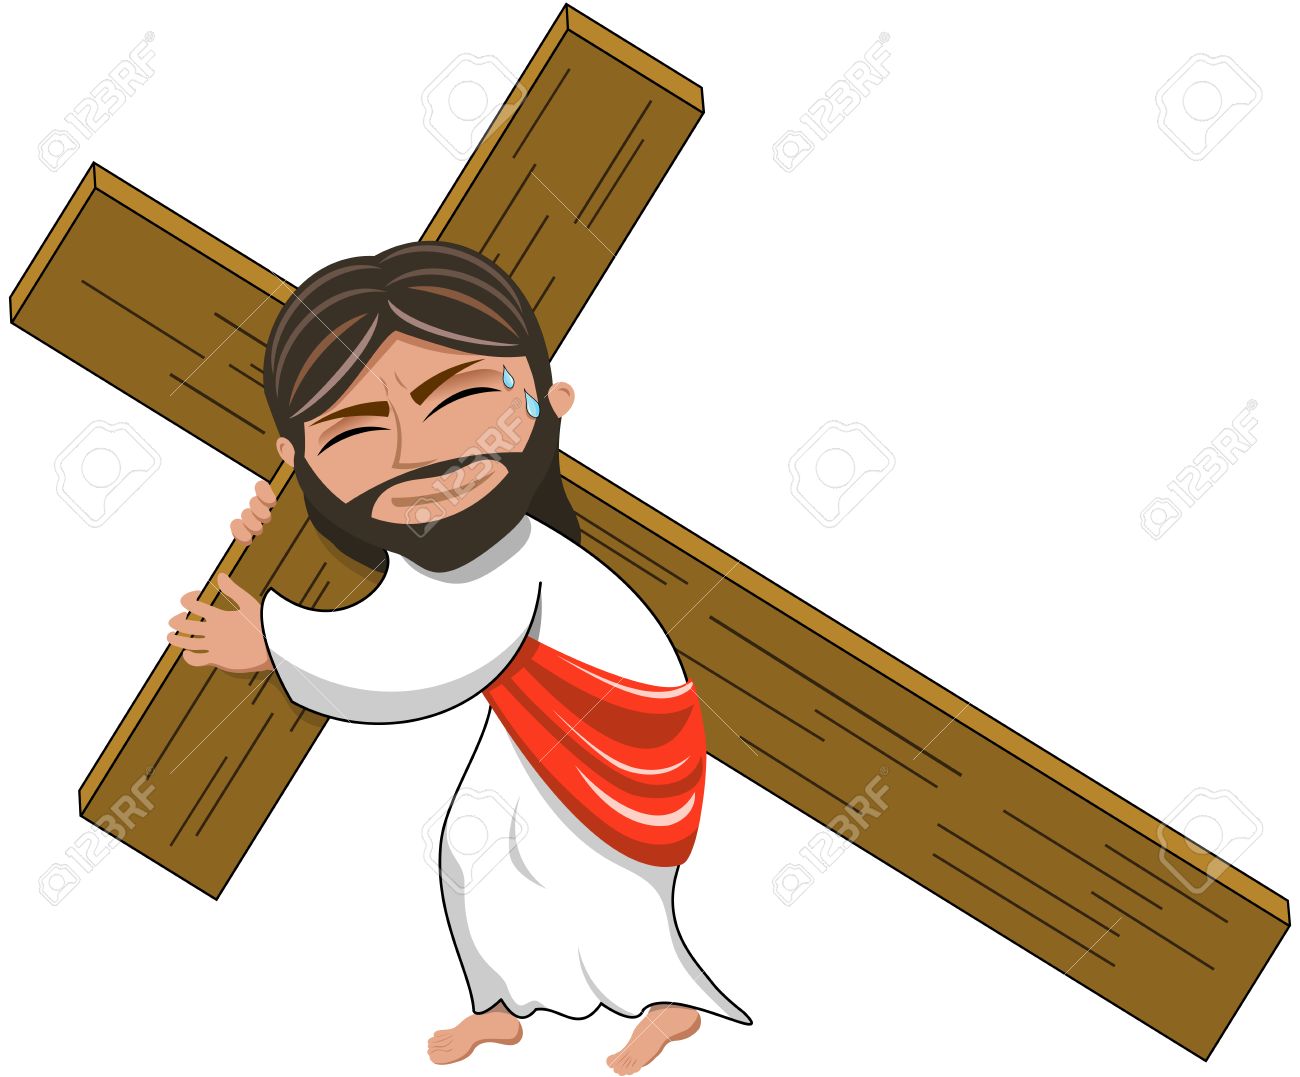 Jesus carrying the cross clipart 3 » Clipart Station.